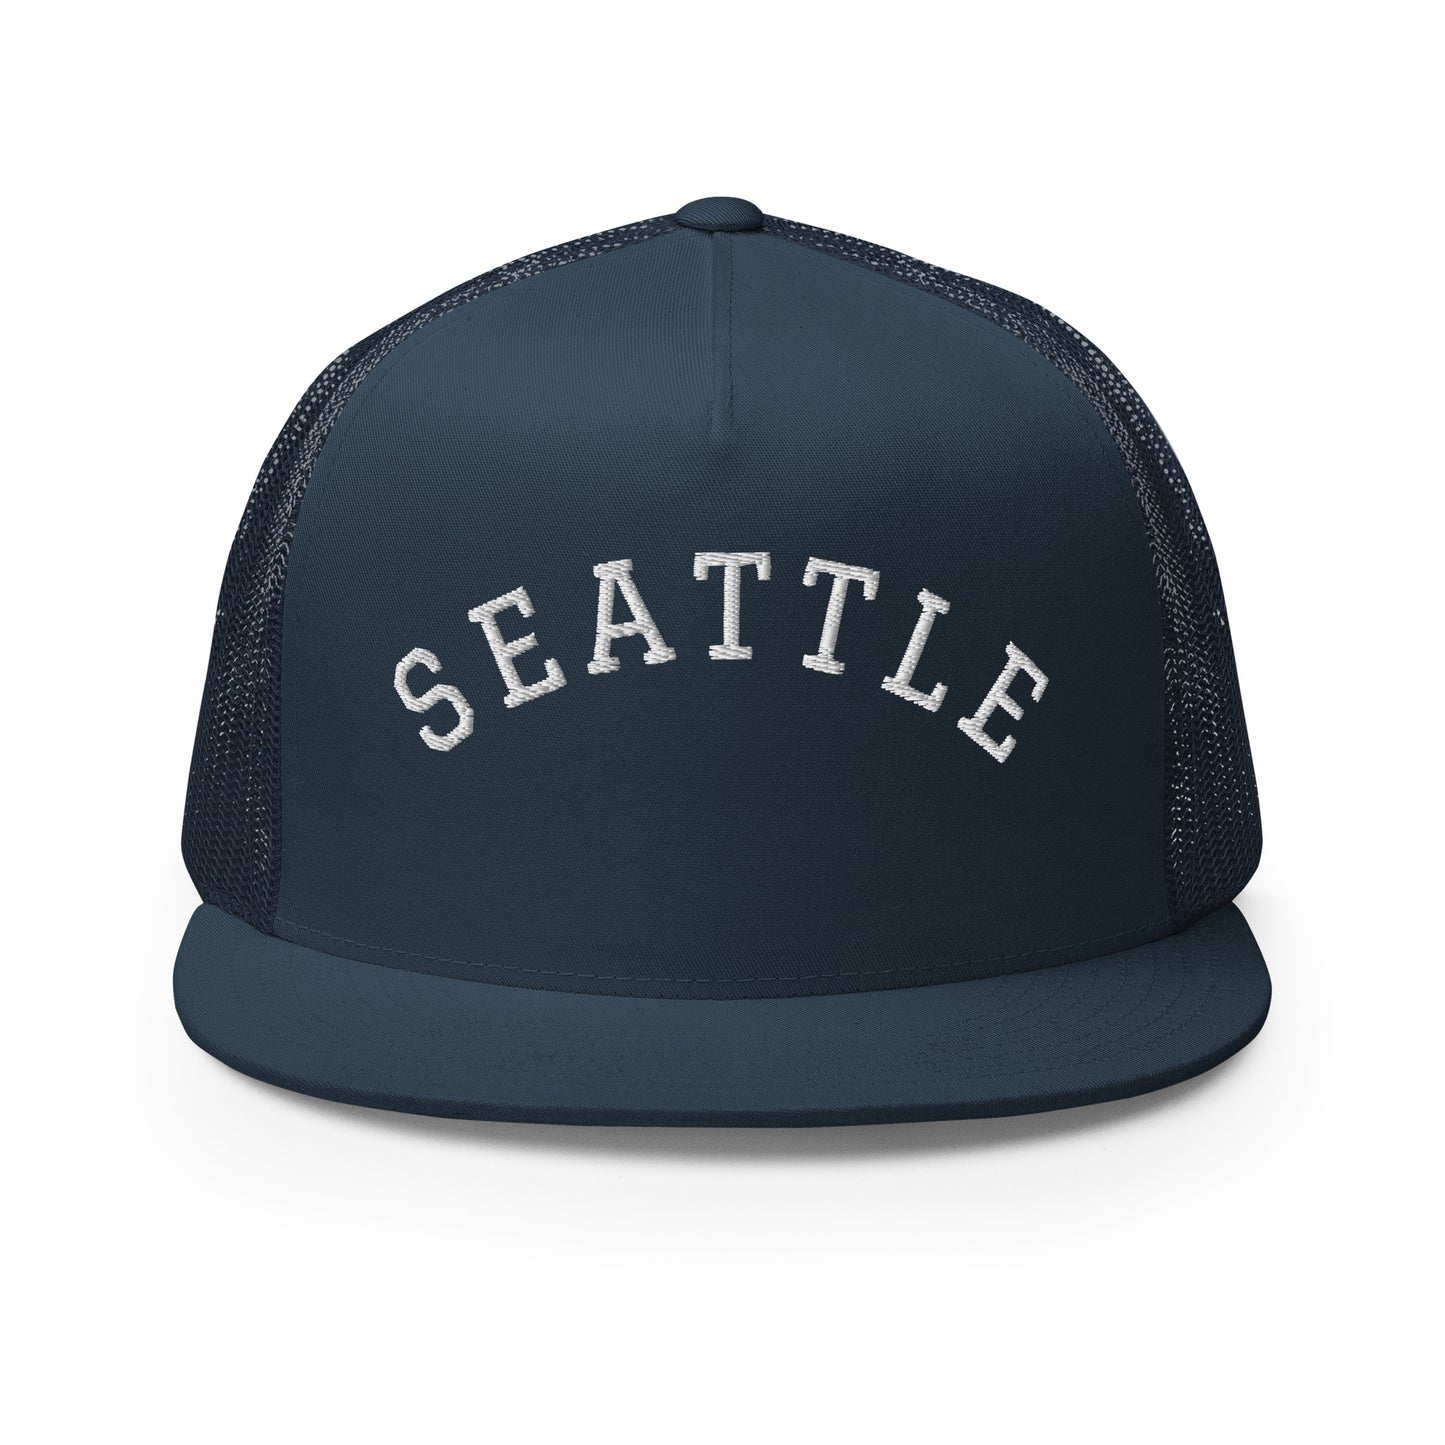 Seattle Arch High 5 Panel A-Frame Snapback Trucker Hat